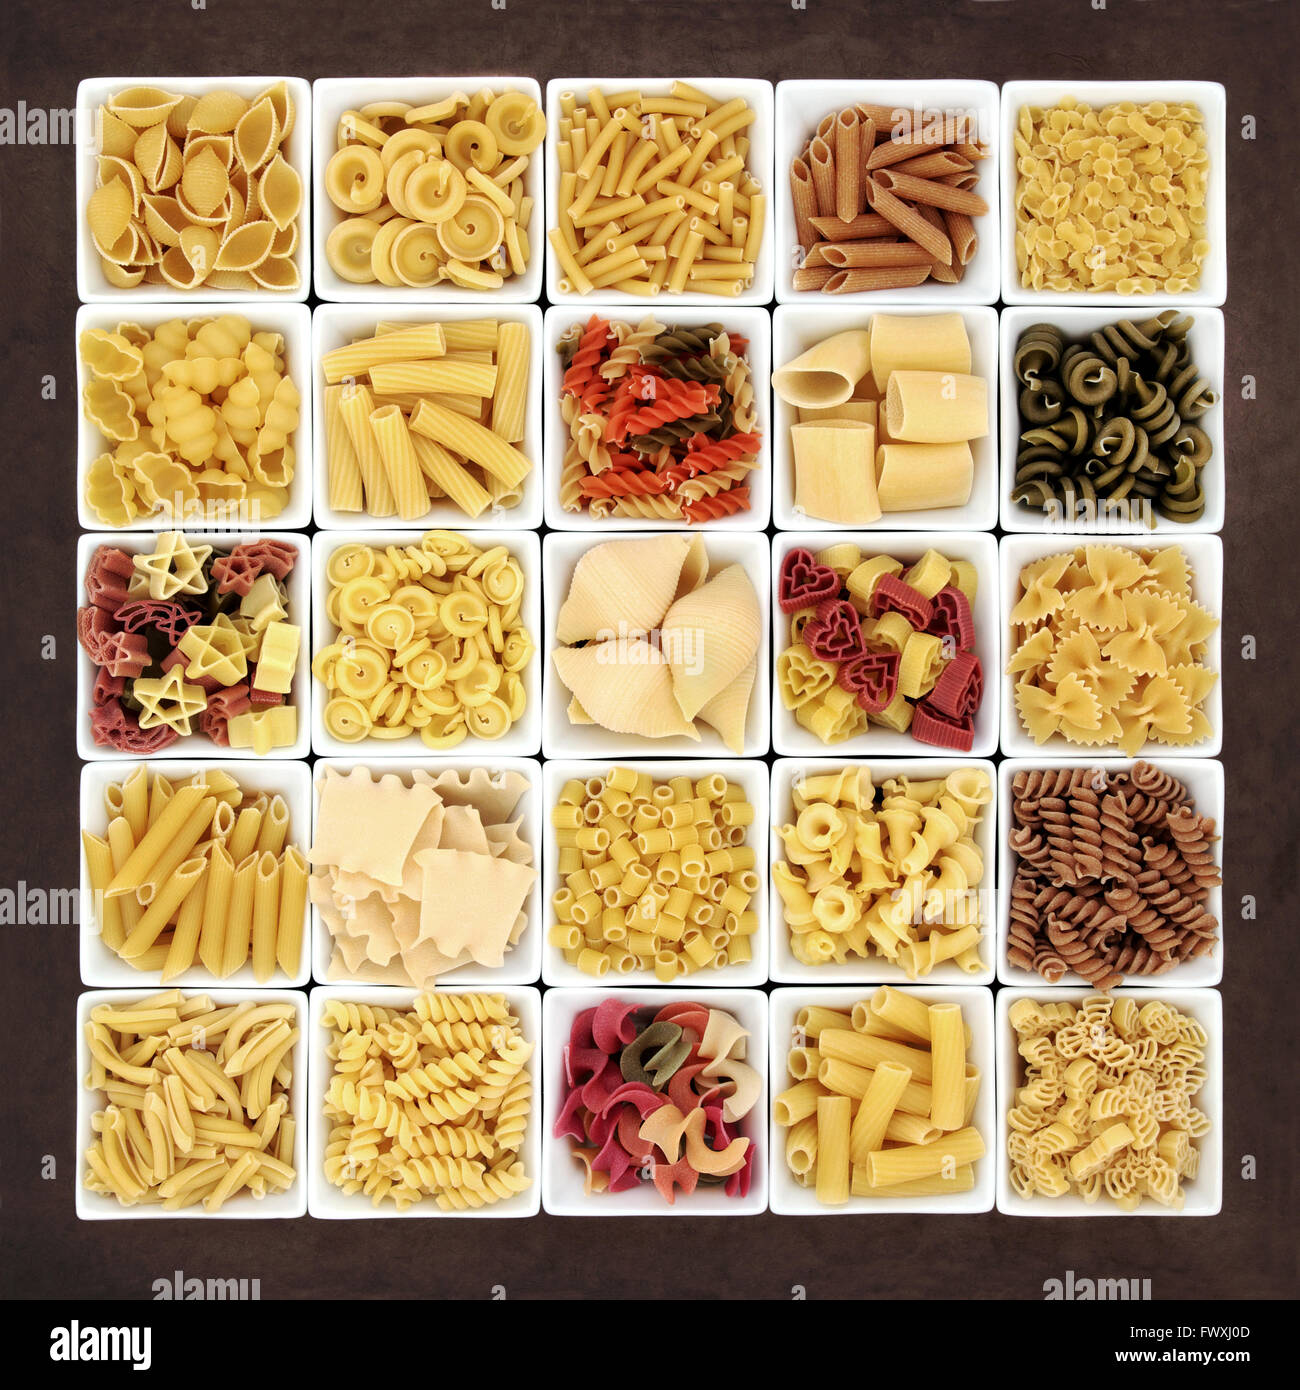 Large pasta dried food sampler in square dishes over brown lokta paper background. Stock Photo